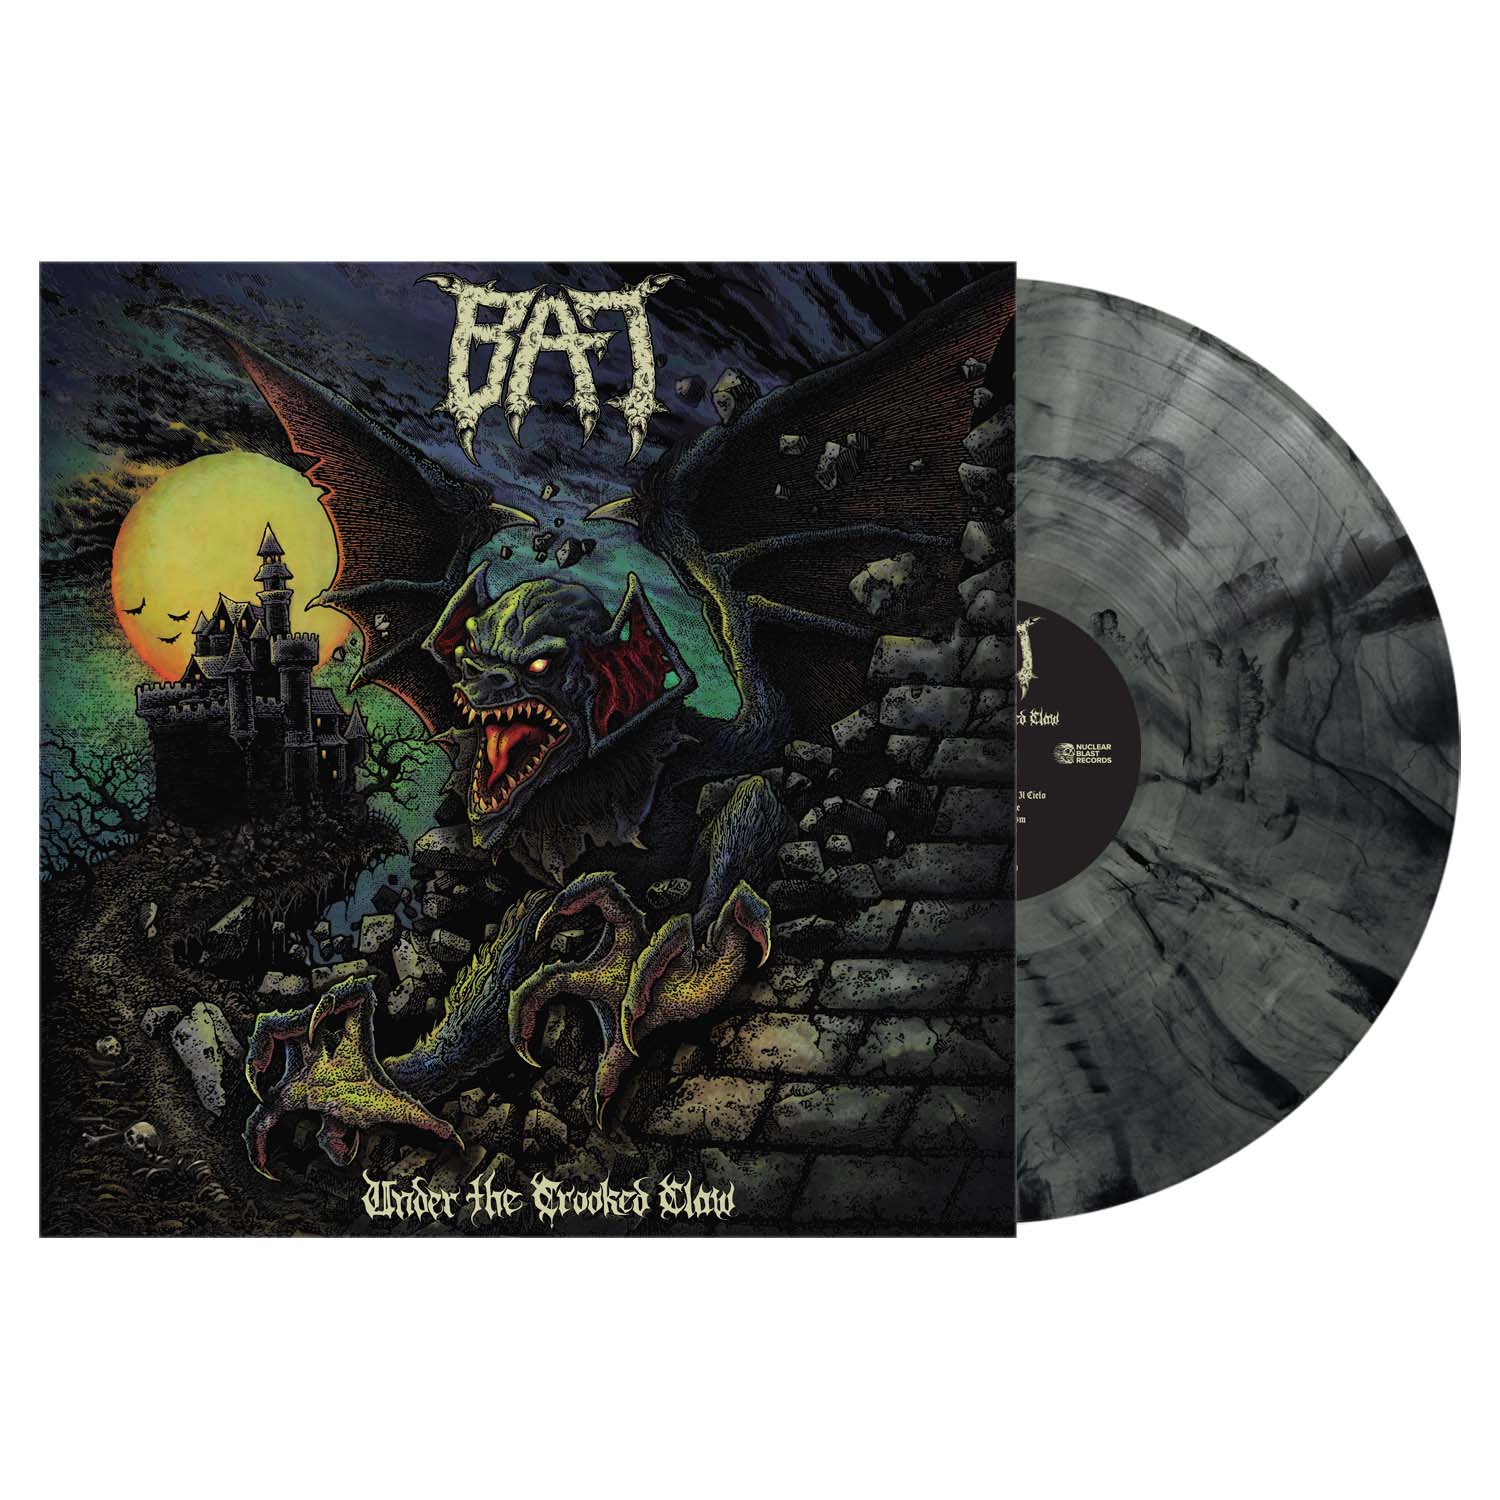 BAT "Under The Crooked Claw" Bottle Clear / Black Marbled Vinyl